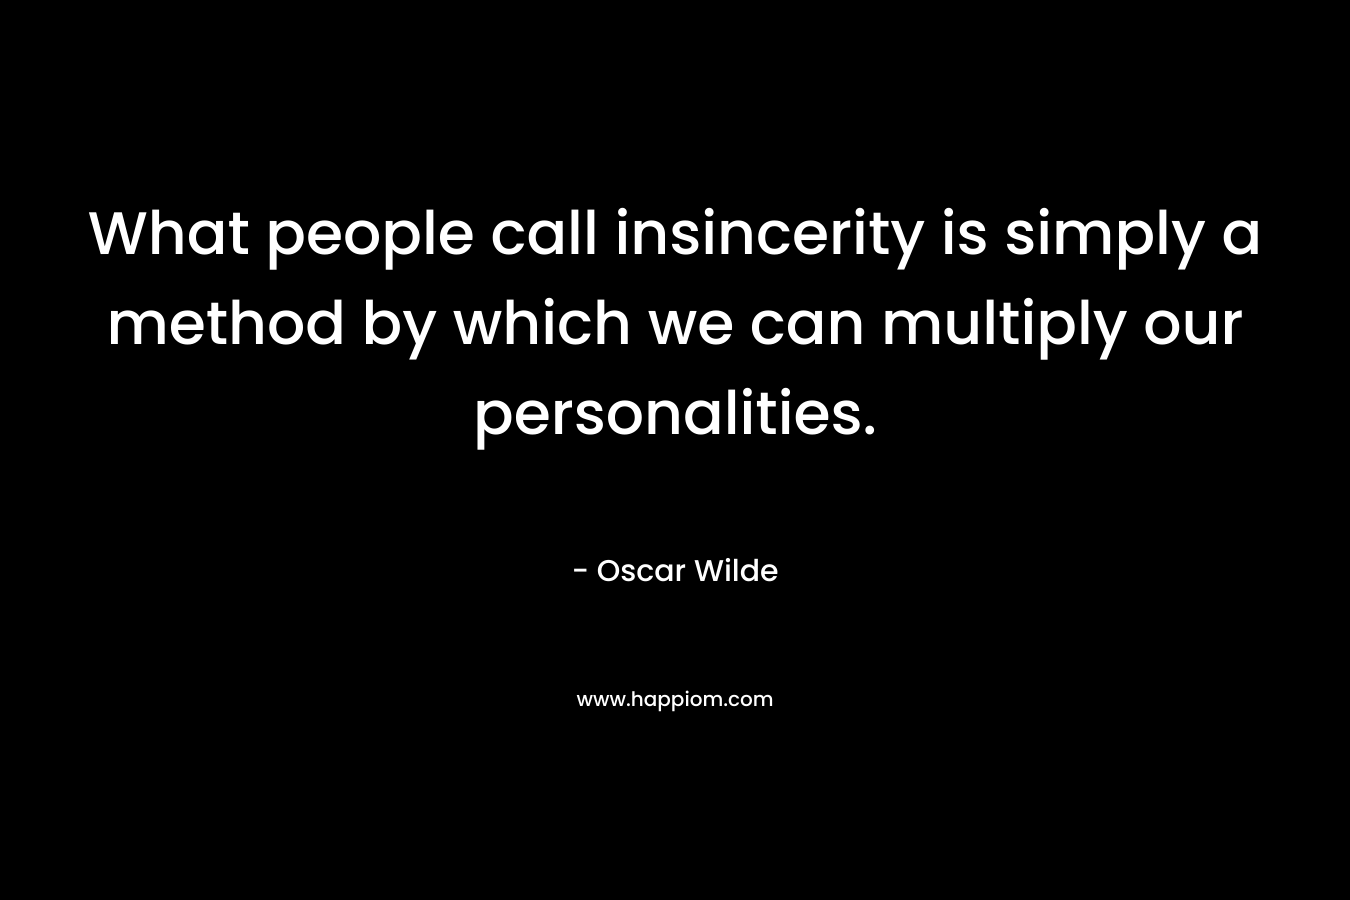 What people call insincerity is simply a method by which we can multiply our personalities.